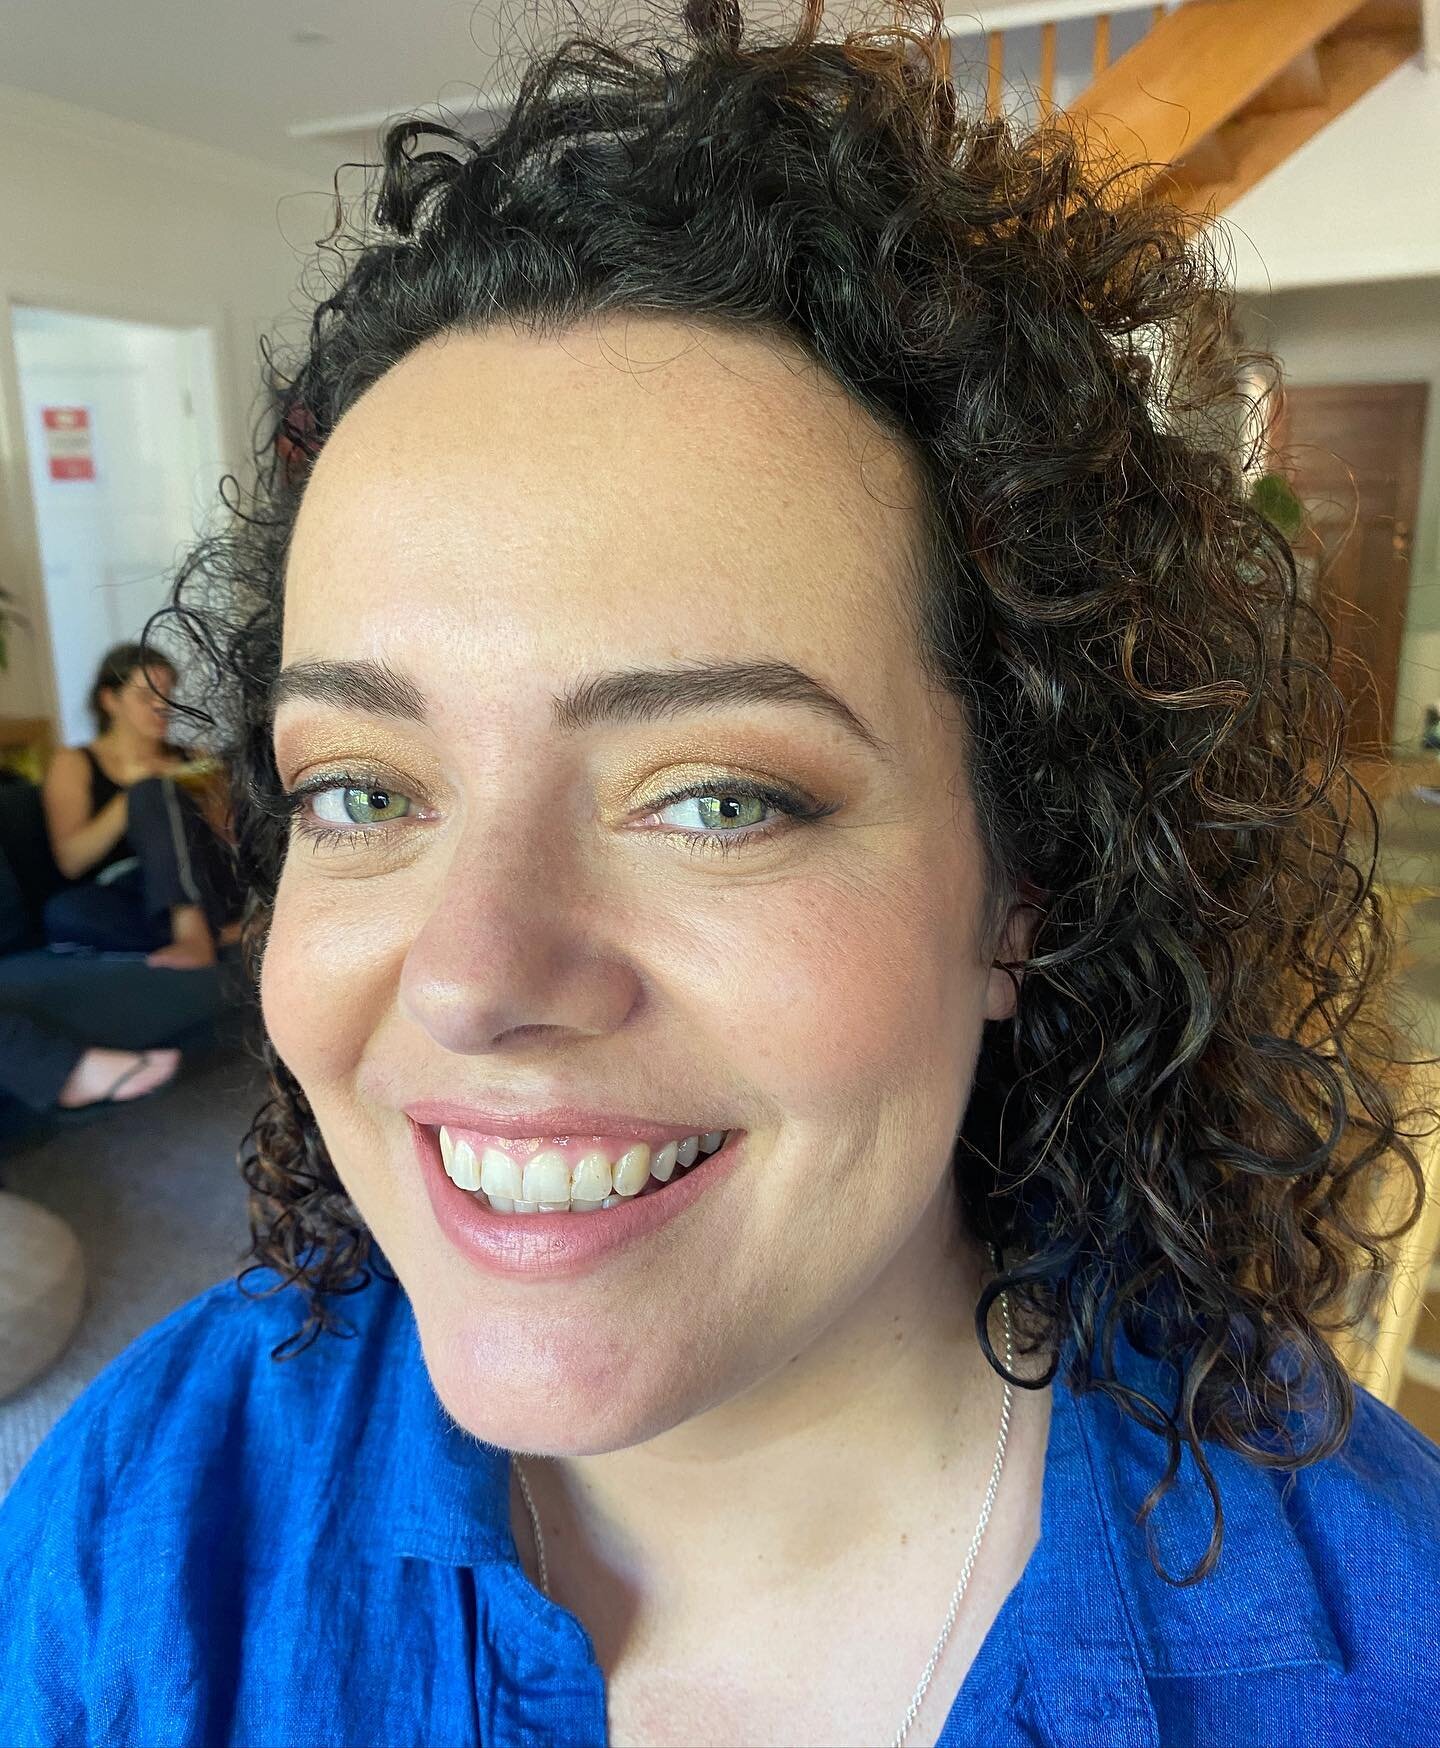 1000% watt smile from Lee, looking absolutely fabulous for her 40th birthday 🥳 
Makeup &amp; express hair by me, booked through @dana_makeupartist 
#eventsmakeup #glammakeup #naturalglam #melbournemakeupartist #melbournemua #melbournehmua #expressha